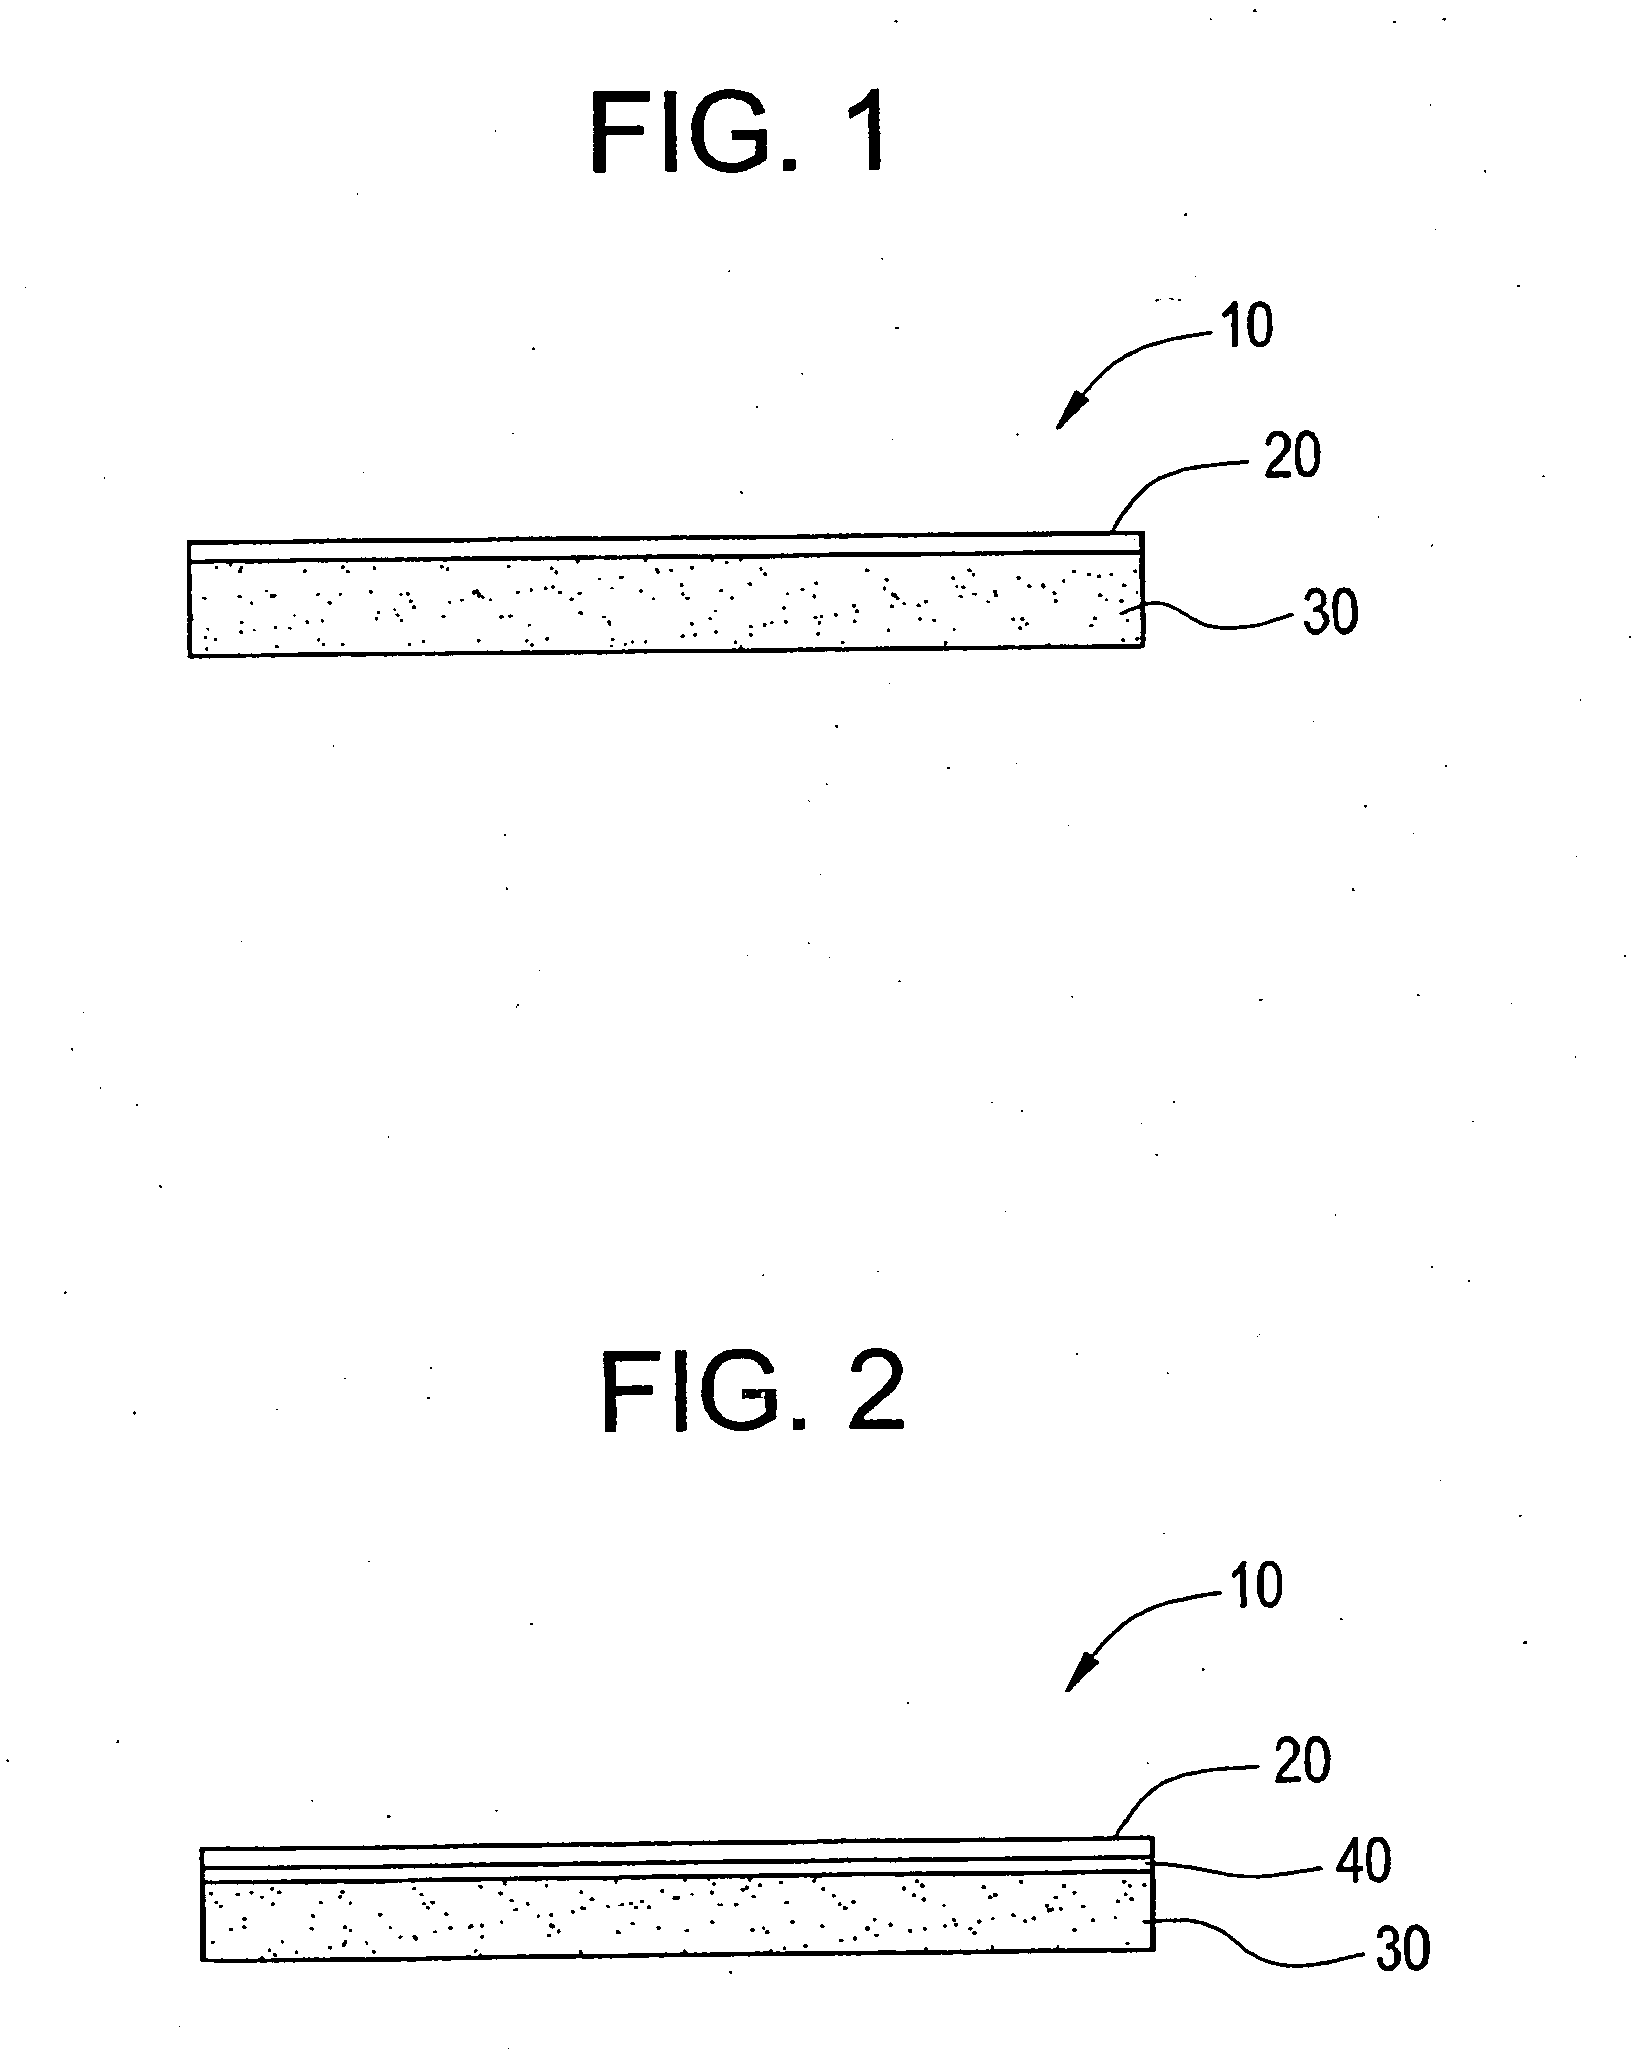 Porous processing carrier for flexible substrates